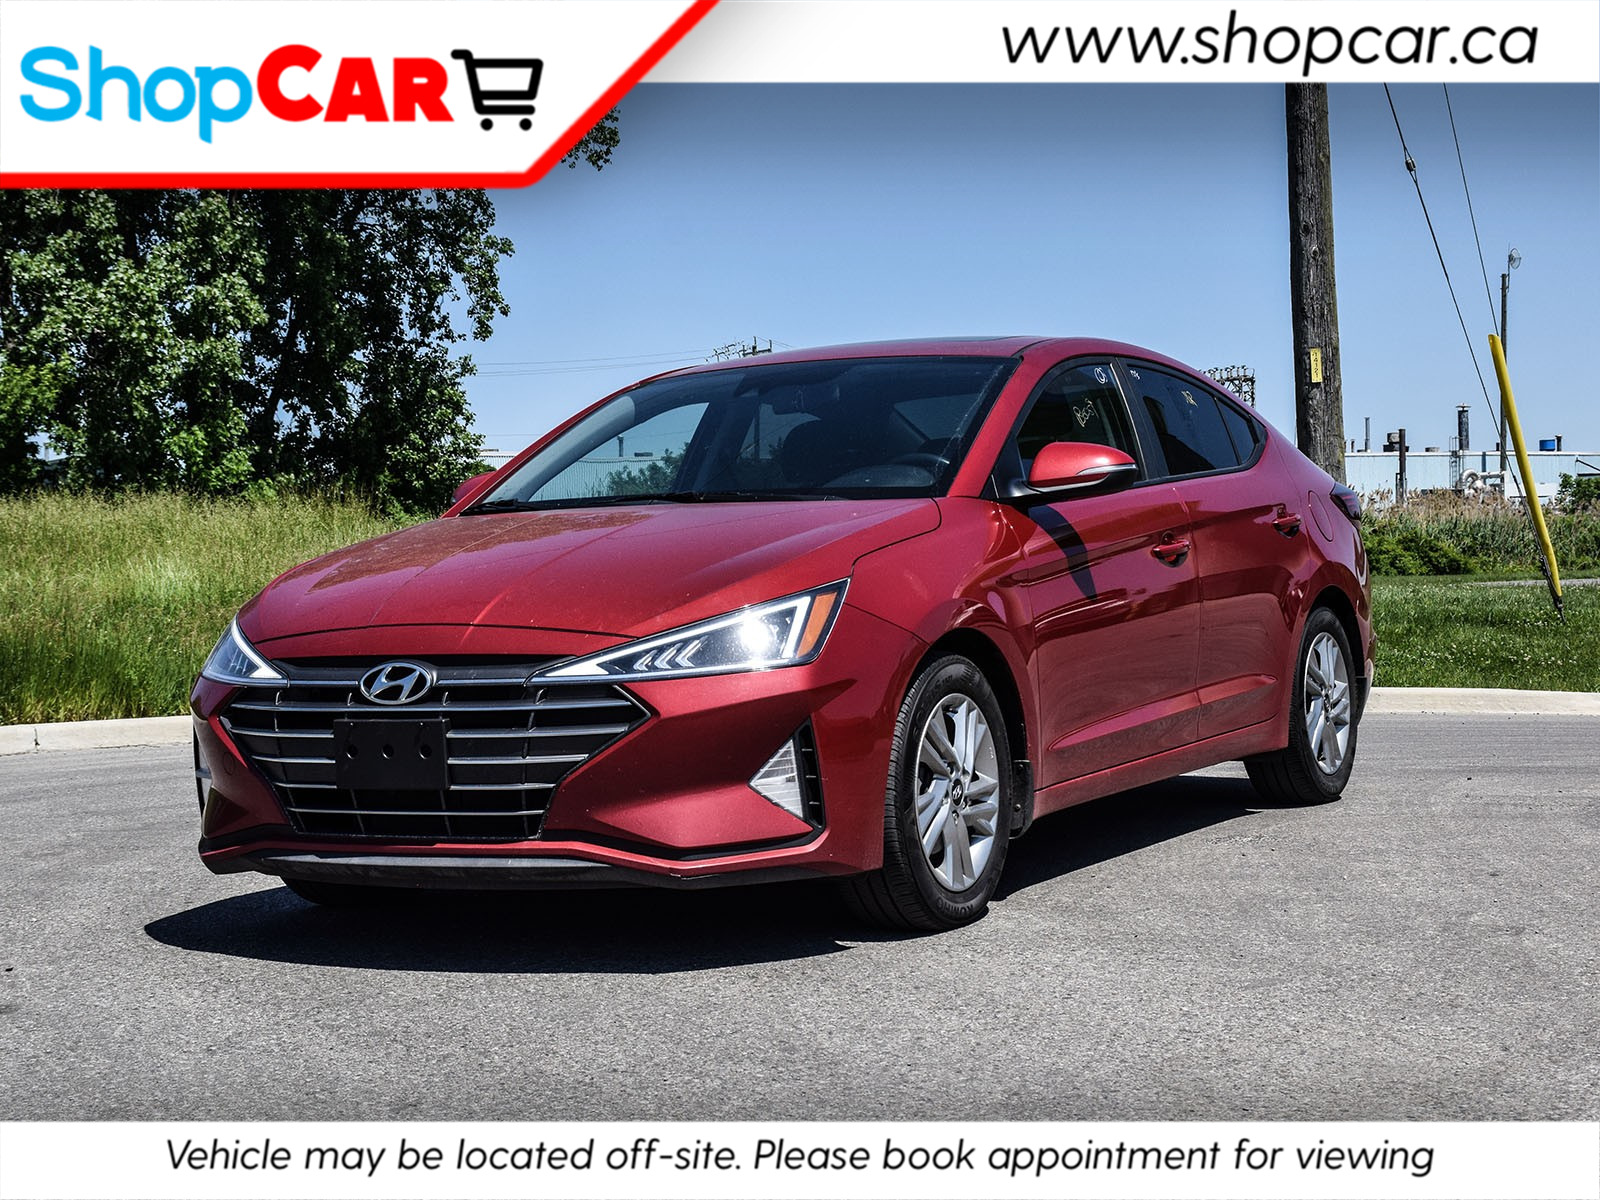 2020 Hyundai Elantra New Arrival | Low KMs | Heated Cloth Seats | Roof